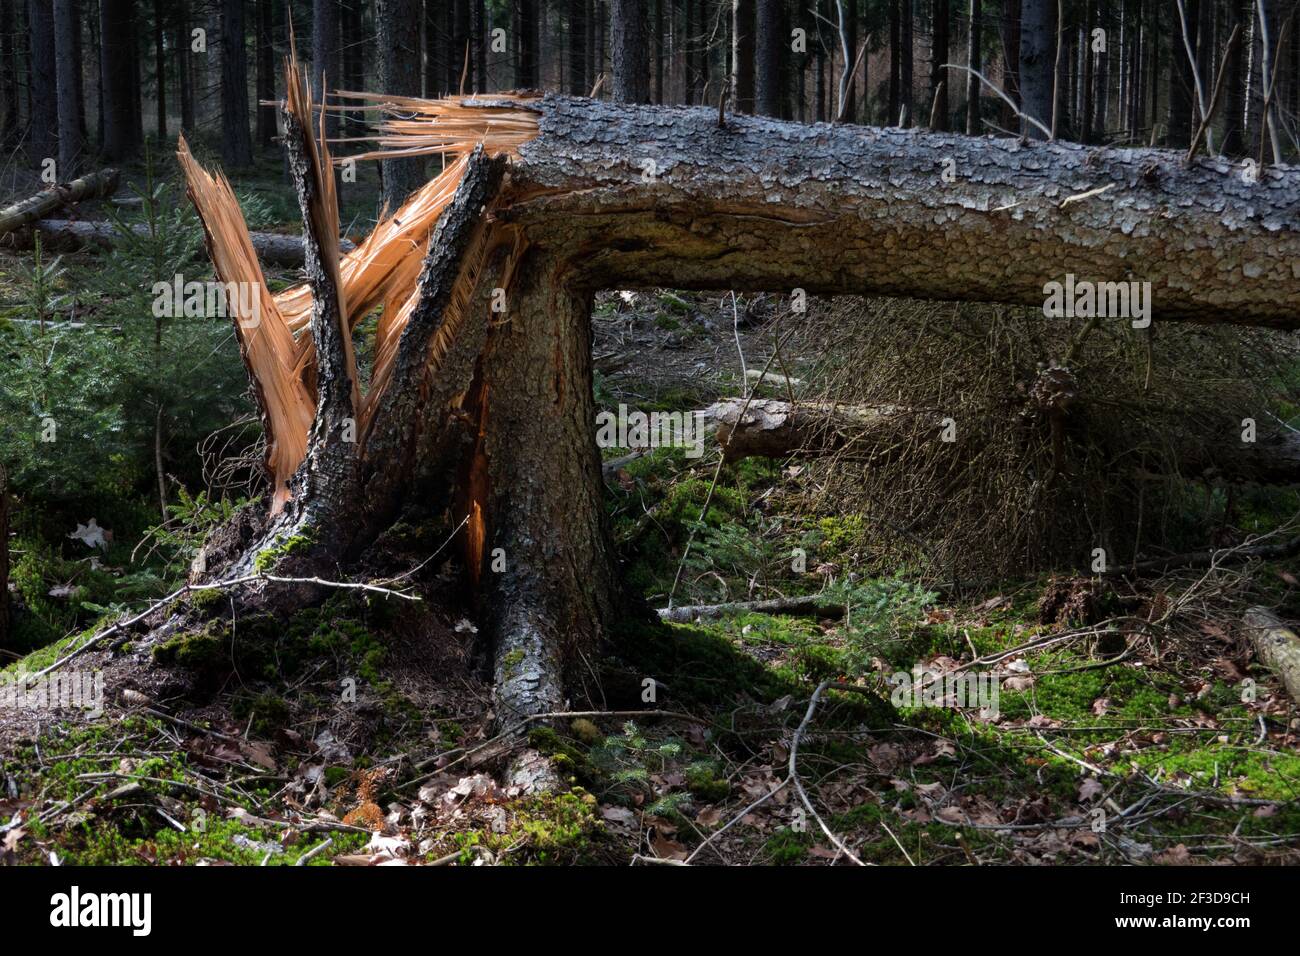 Storm damage: cracked pine tree in a forest Stock Photo